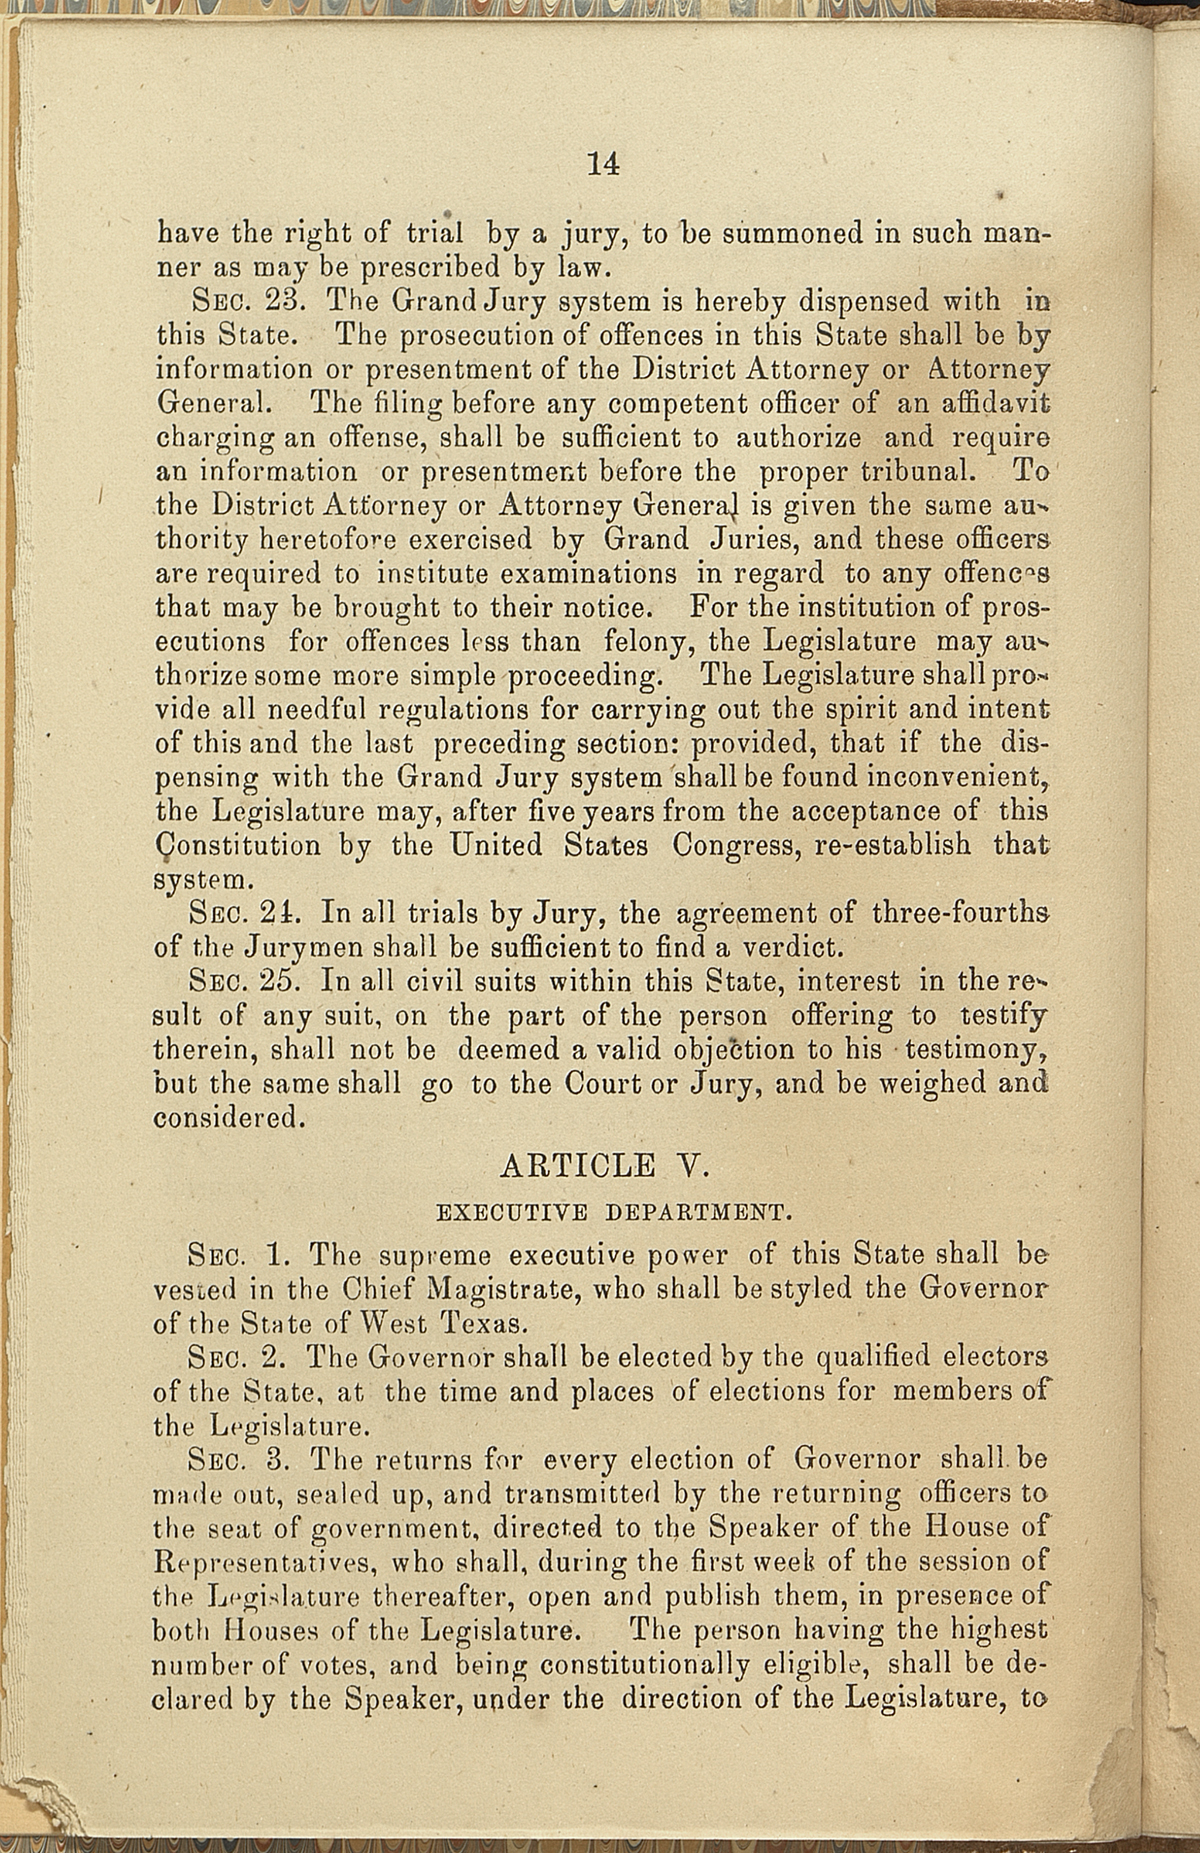 Article V, Sections 1-3